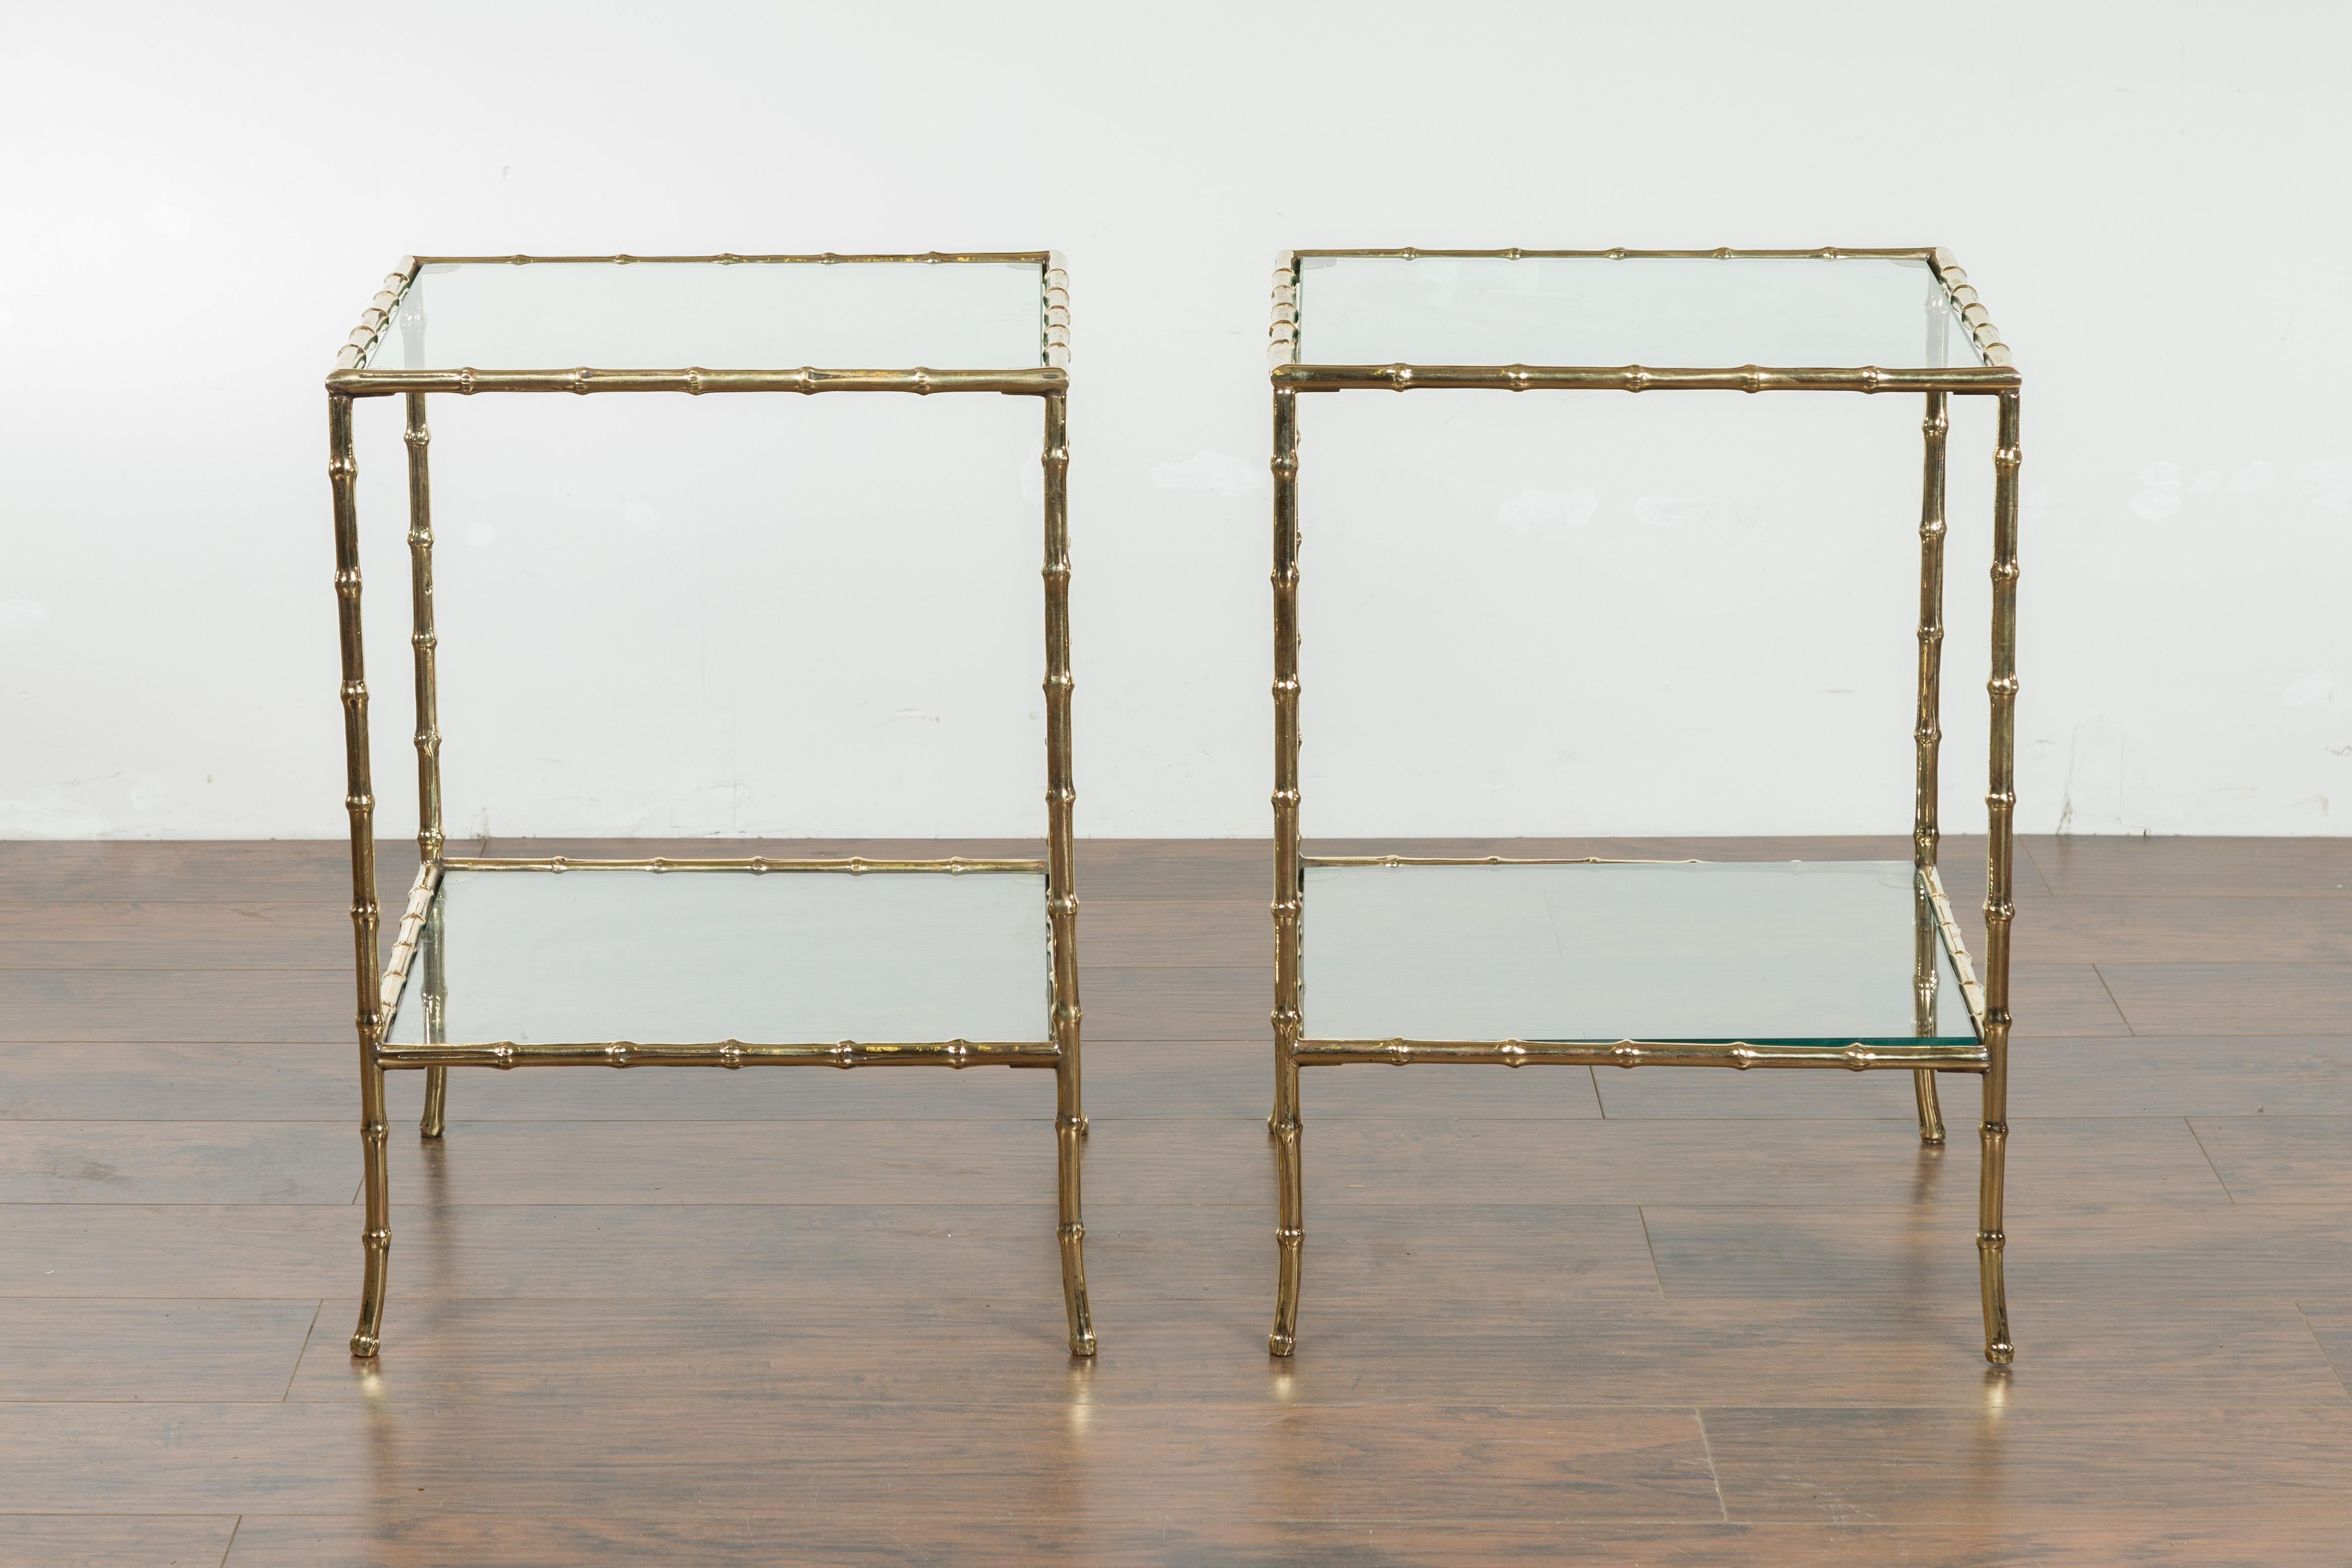 A pair of Italian bronze faux-bamboo end tables from the mid-20th century, with glass tops and shelves. Created in Italy during the midcentury period, each of this pair of end tables features a square-shaped glass top secured within a faux bamboo